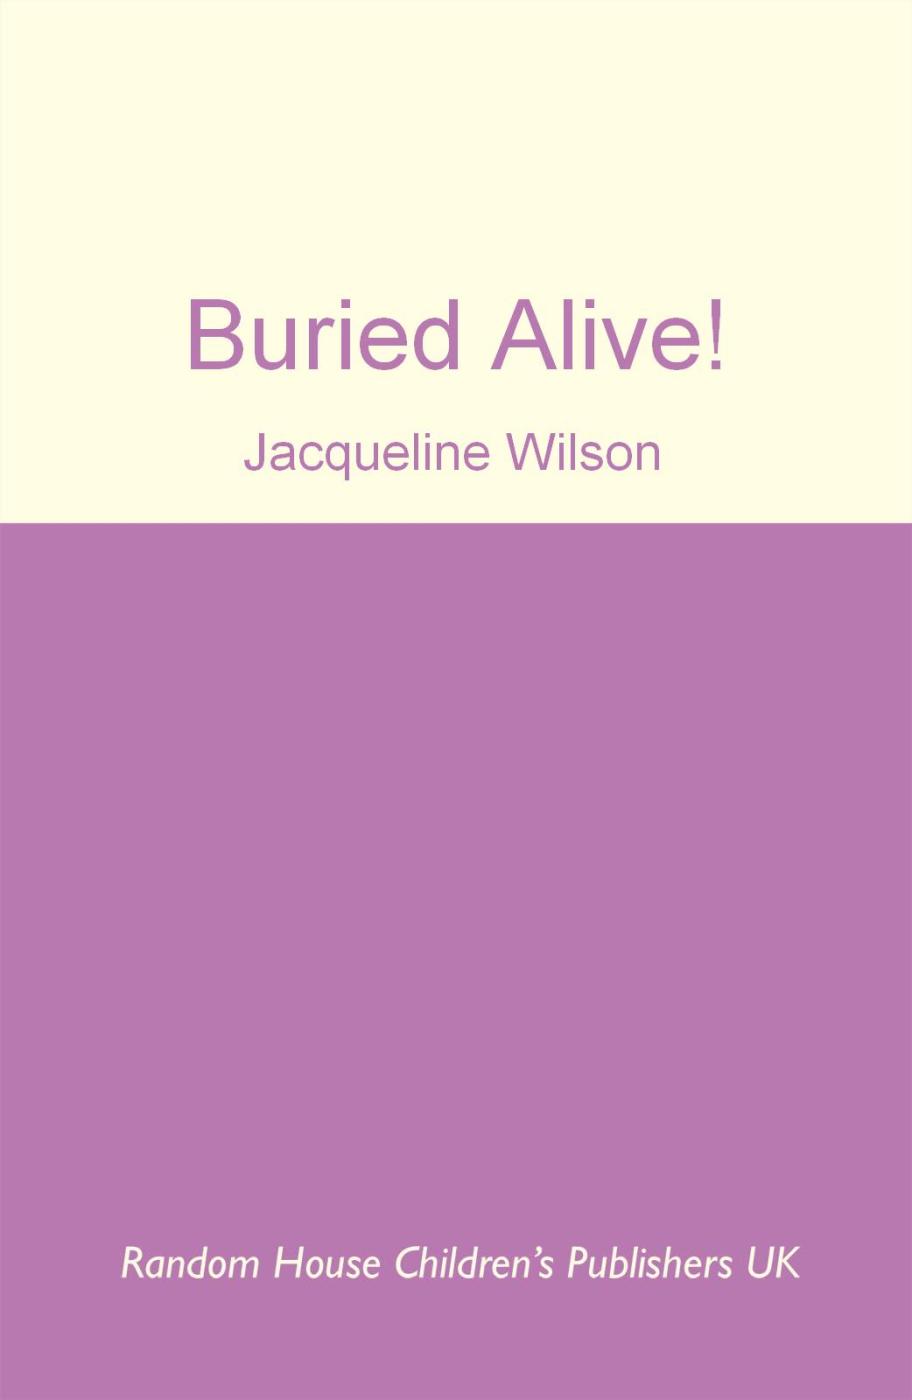 Buried Alive! (2010) by Jacqueline Wilson